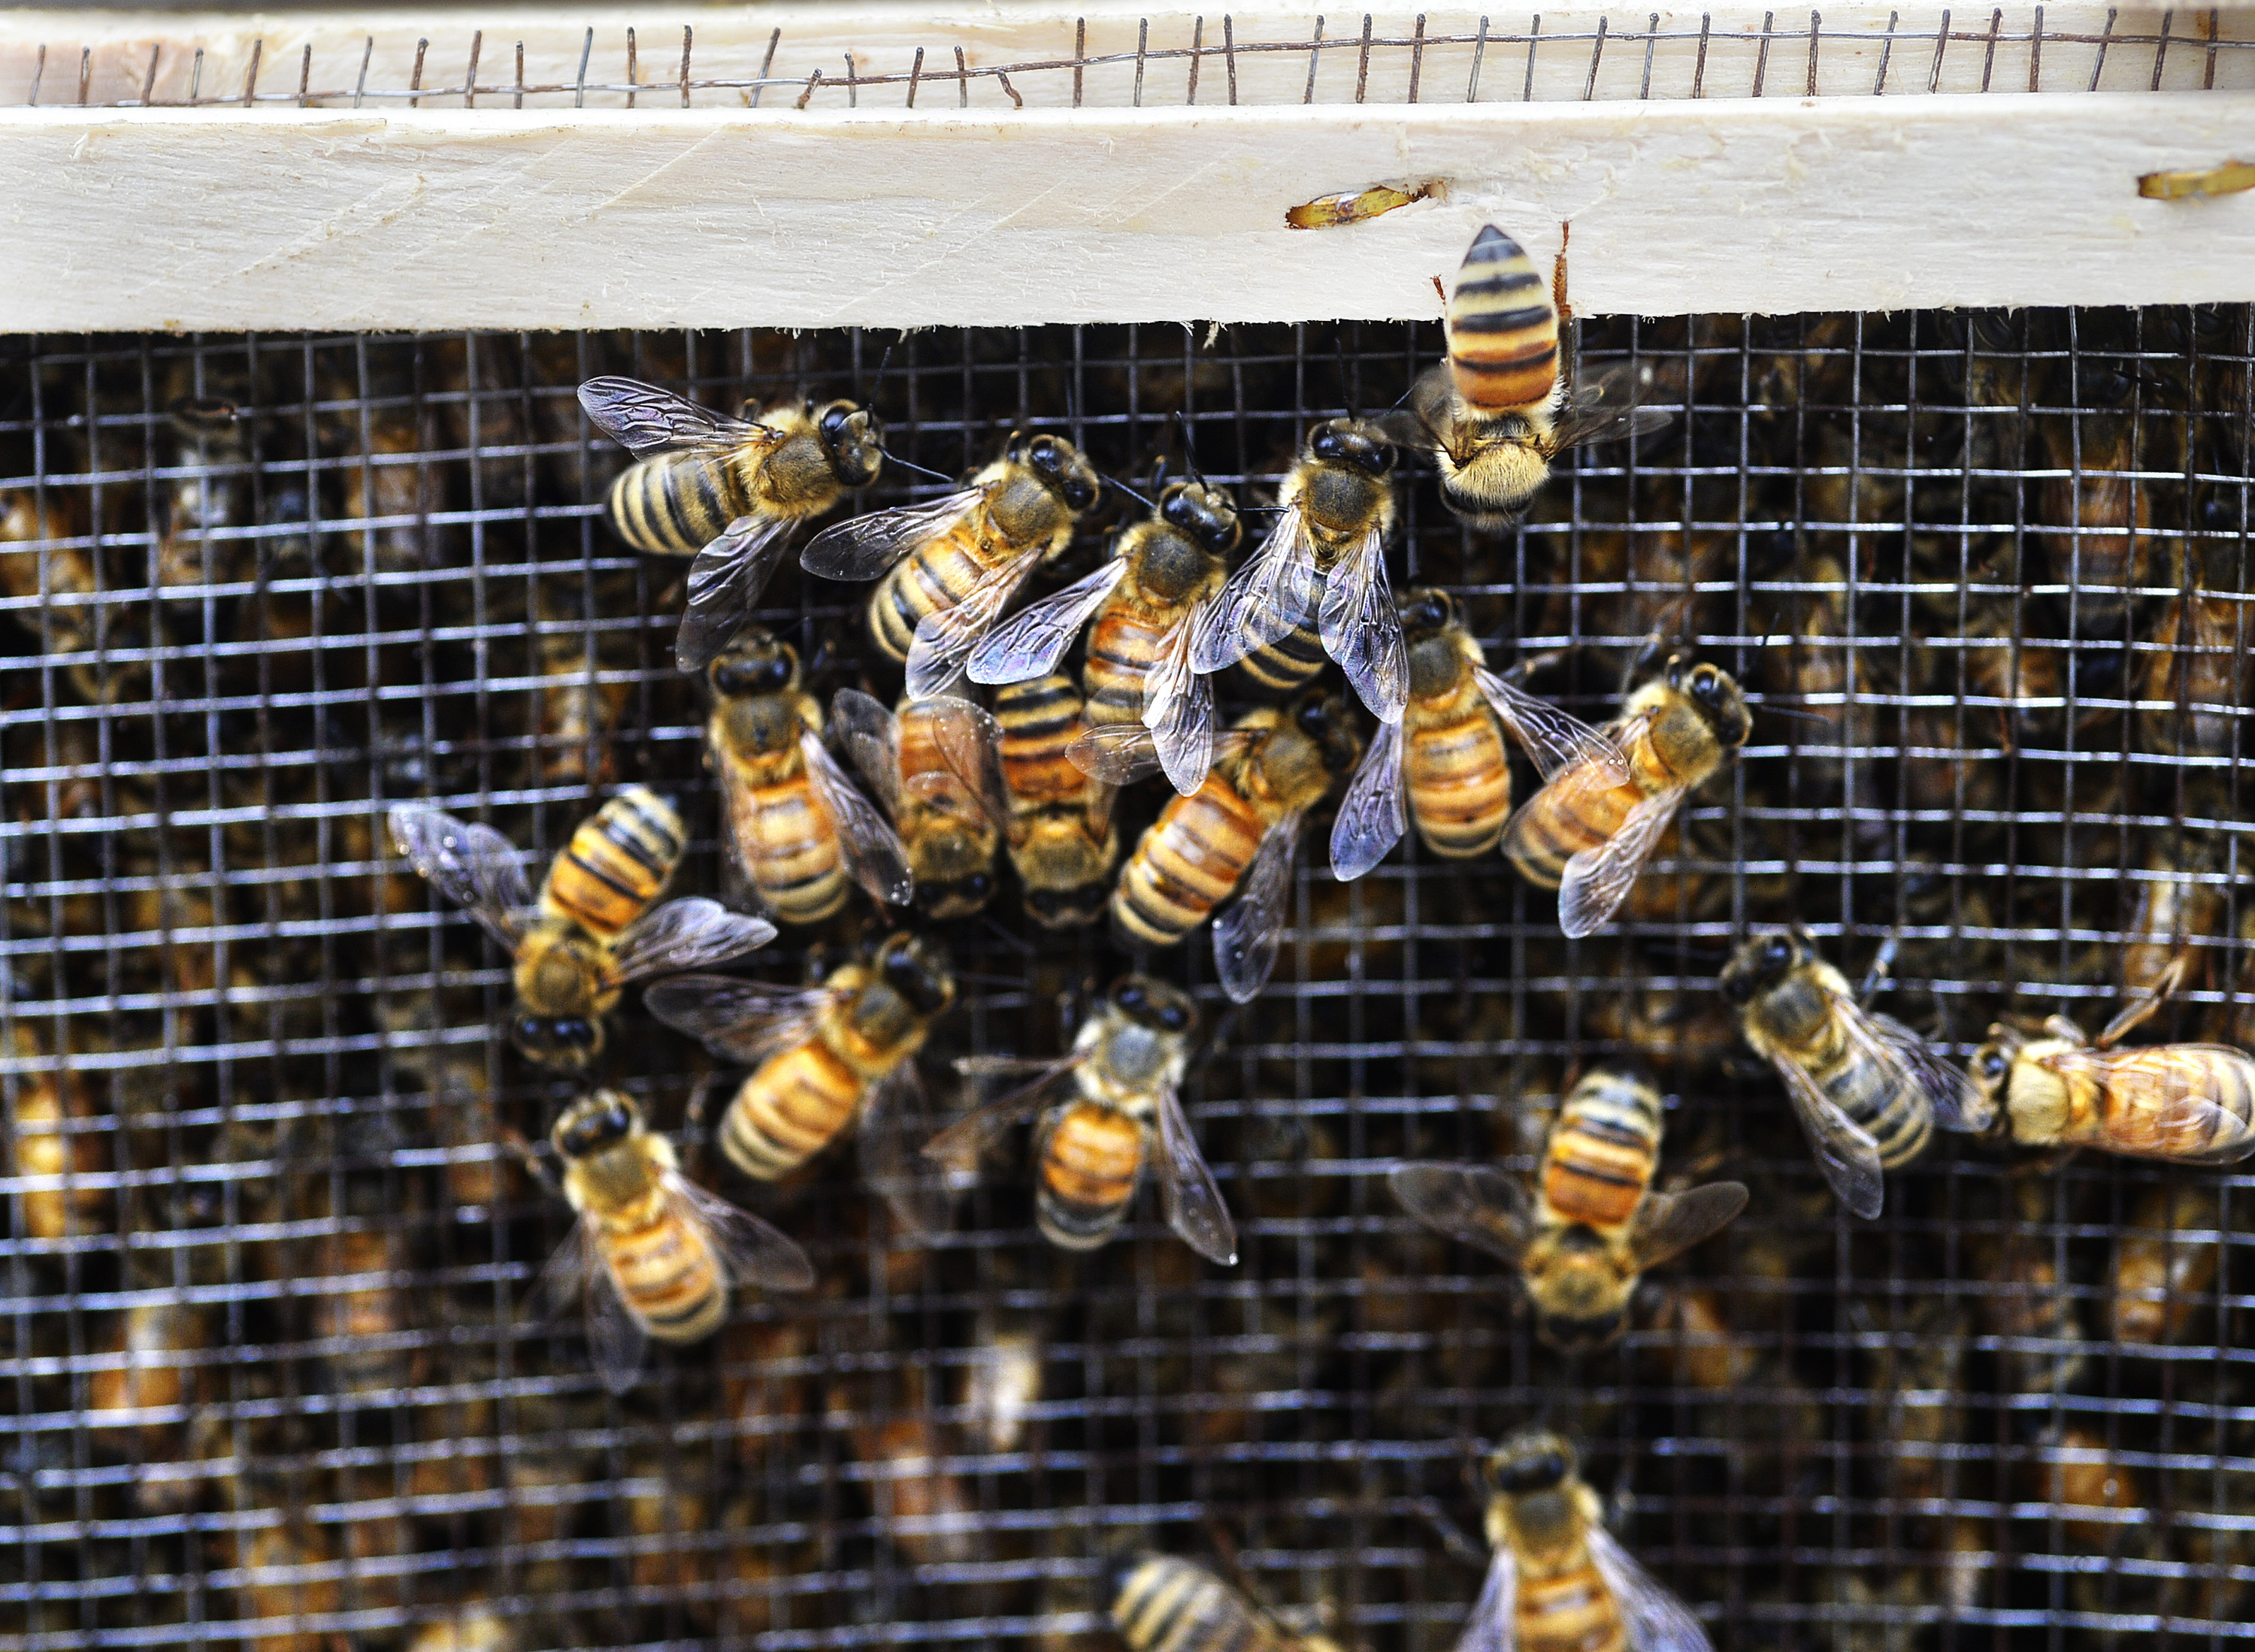 Bees at the Route 1 visitors center in Yarmouth on April 28, 2017. (Shawn Patrick Ouellette—Portland Press Herald/Getty Images)